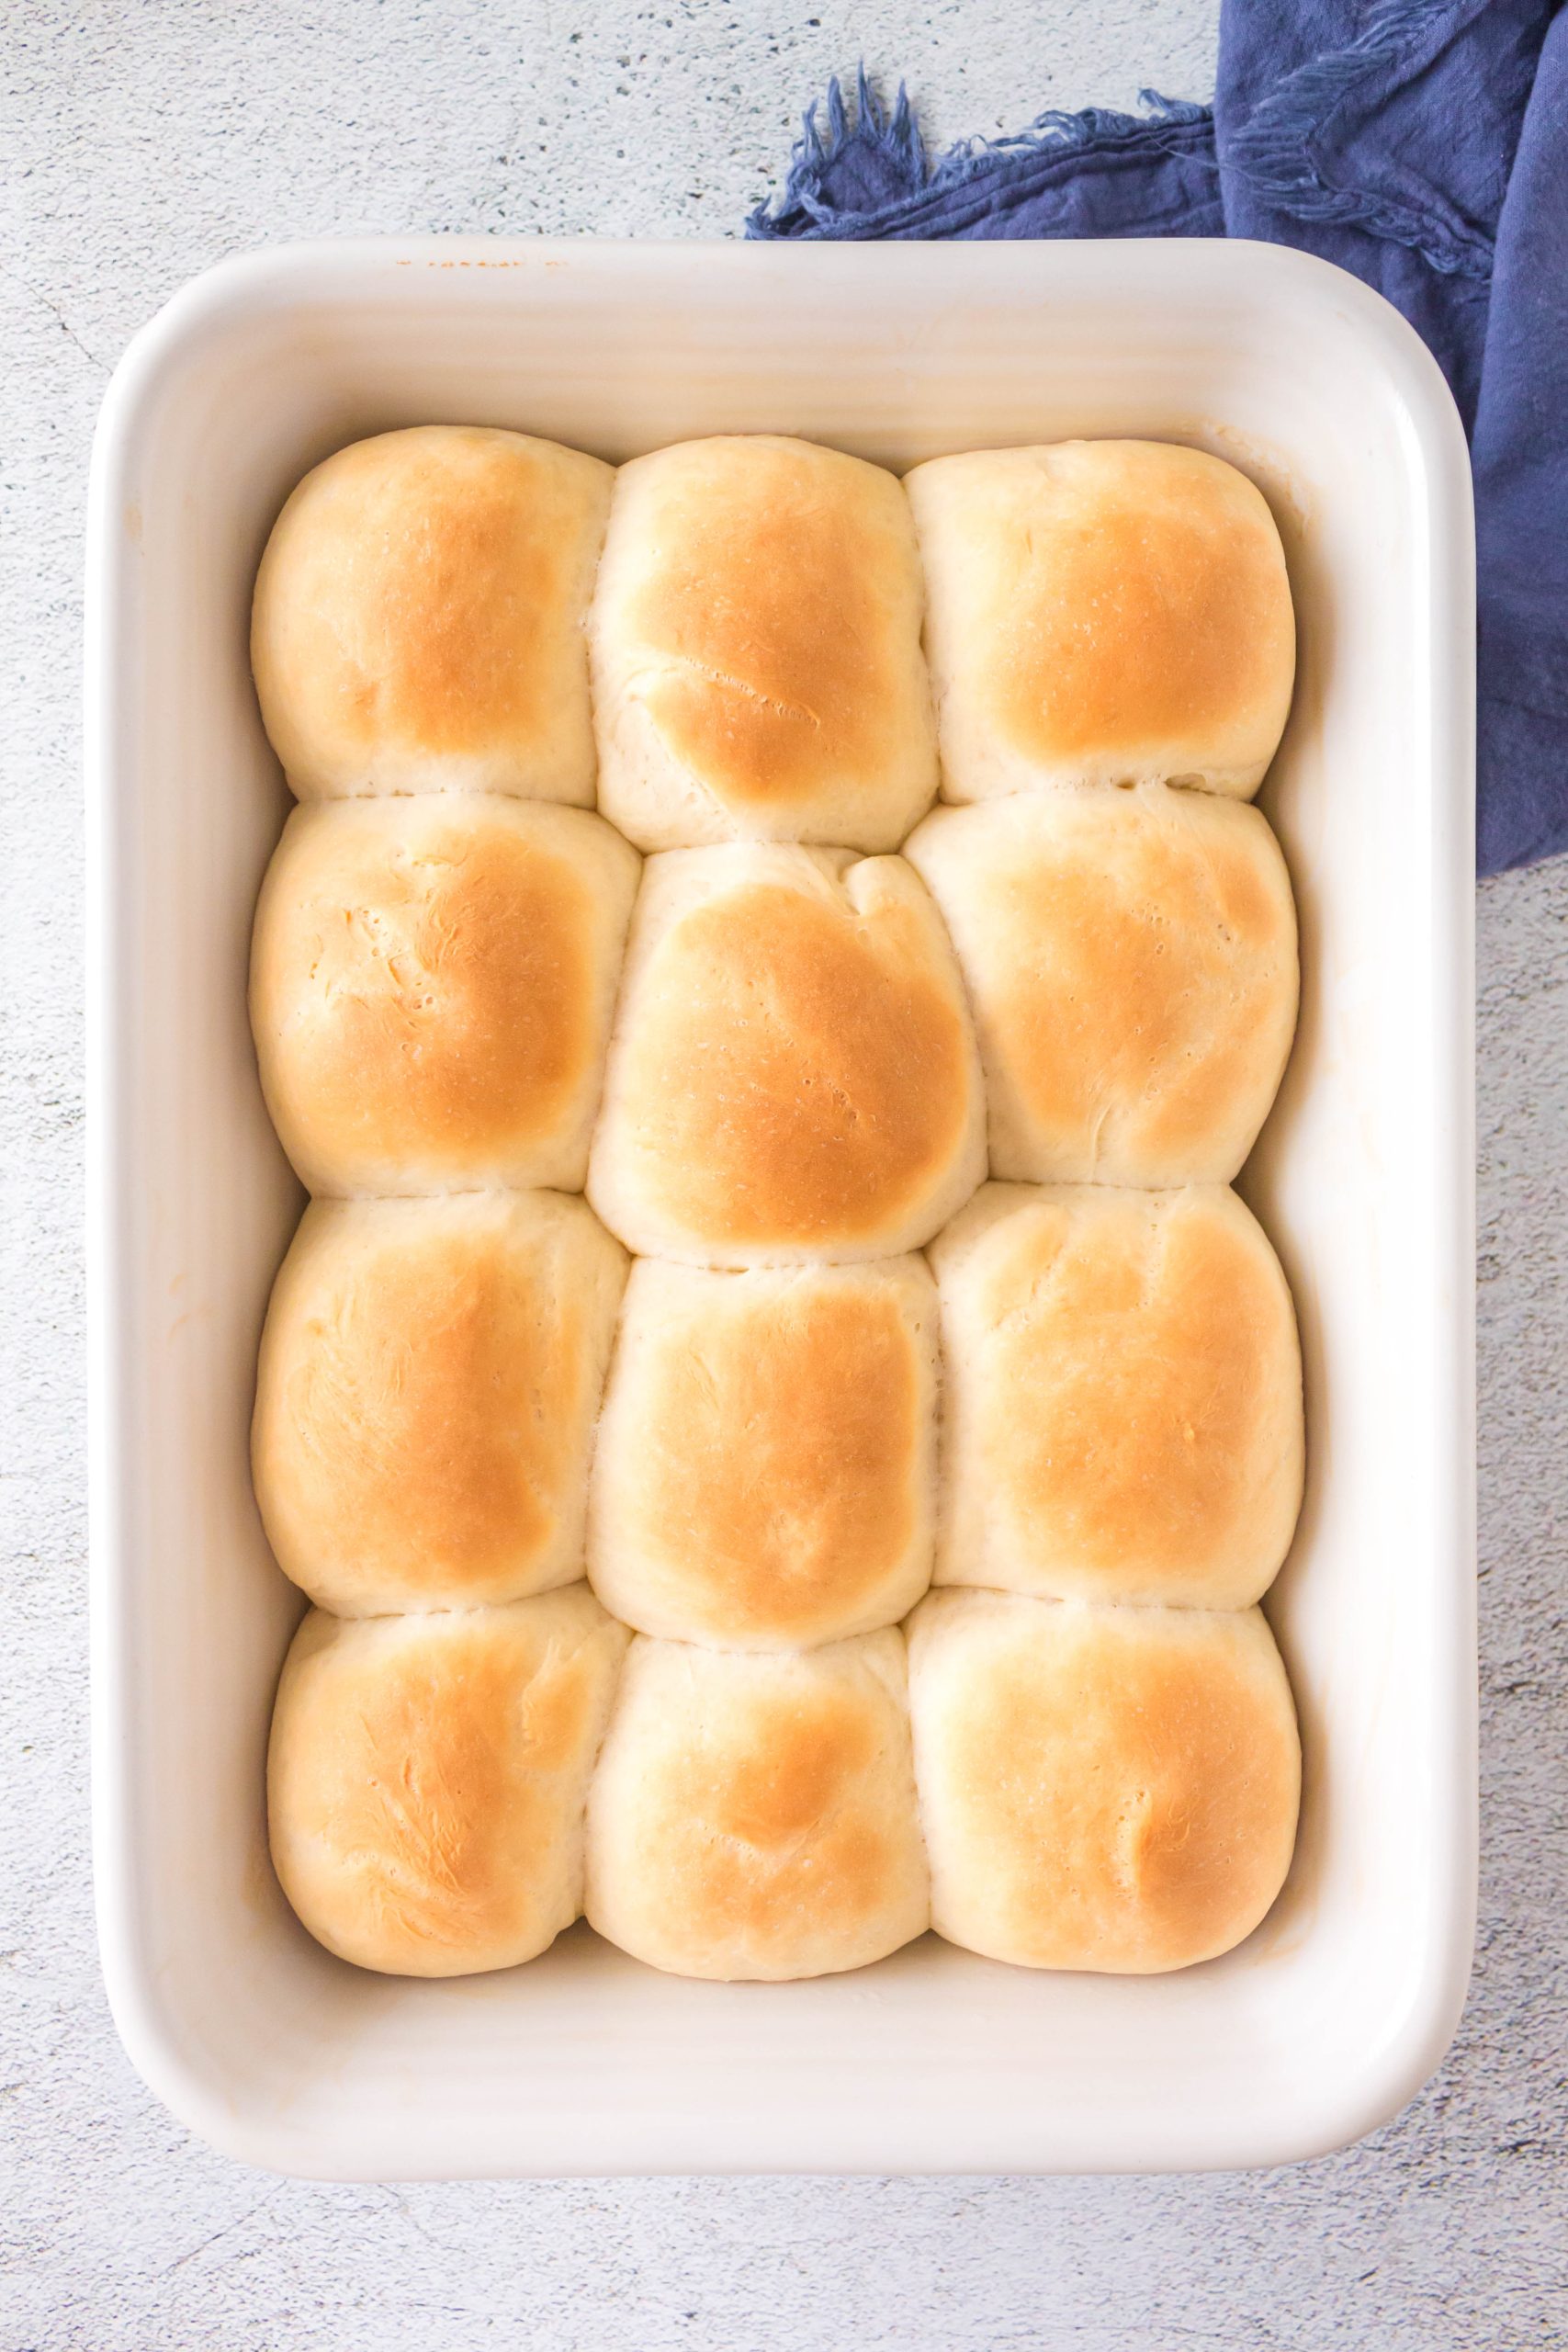 Top down view of golden brown dinner rolls in a baking dish.